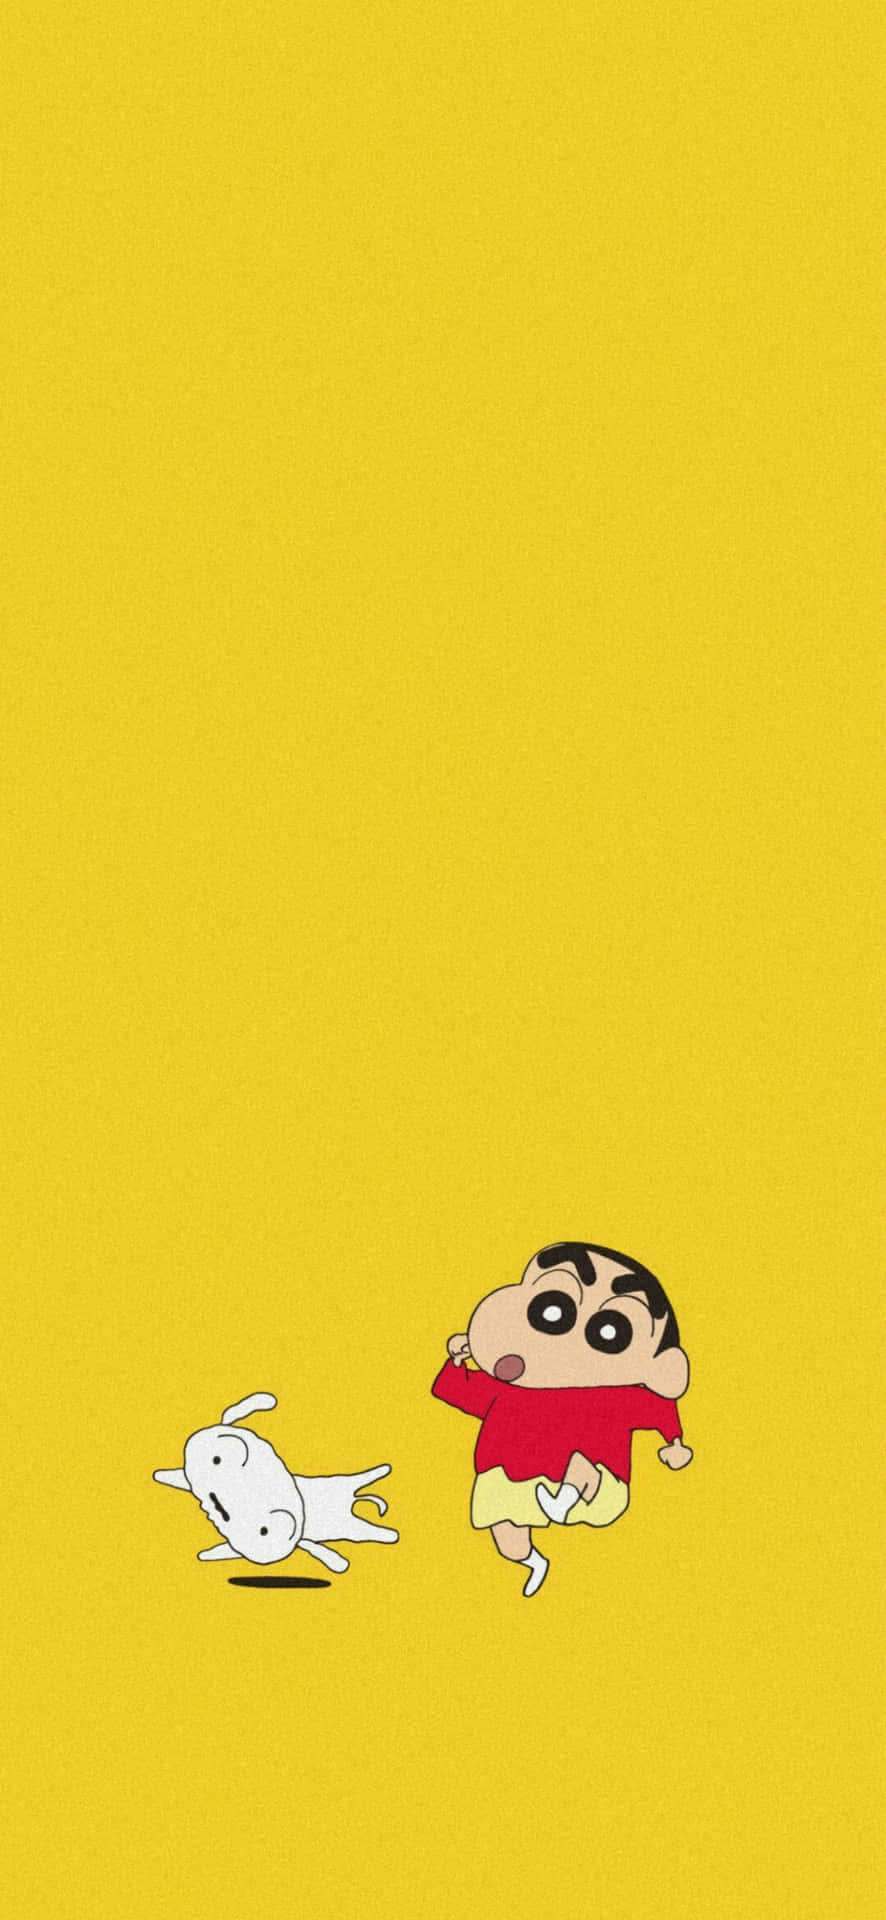 Download Shin Chan is always ready for fun adventures! | Wallpapers.com